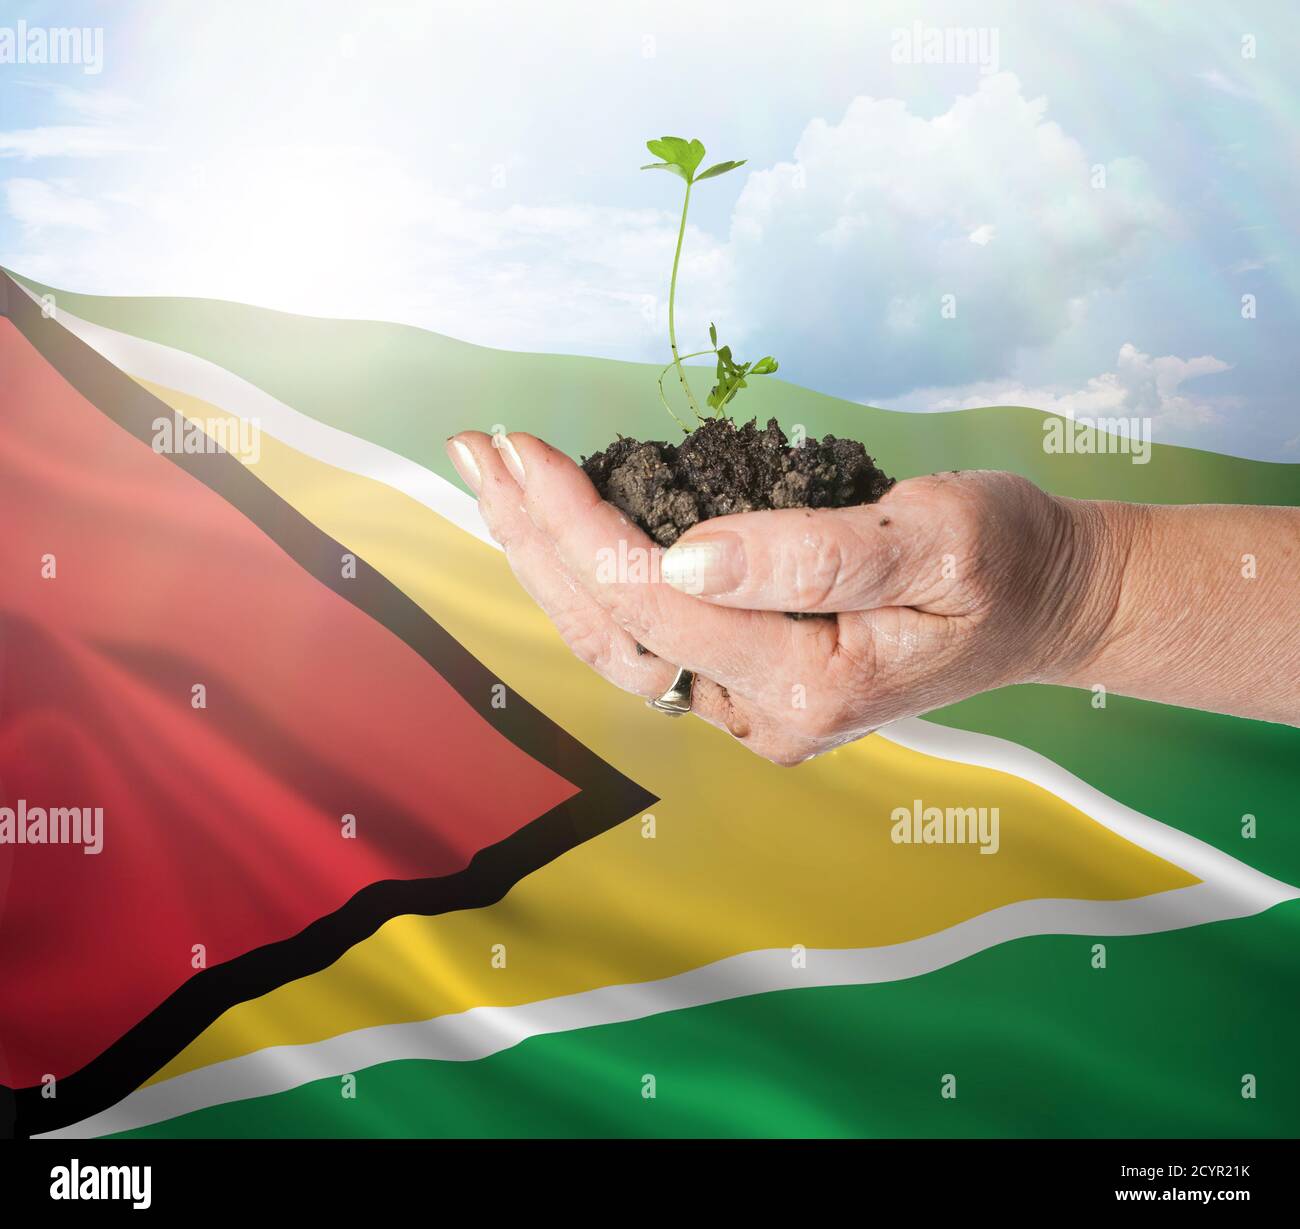 Guyana growth and new beginning. Green renewable energy and ecology concept. Hand holding young plant. Stock Photo